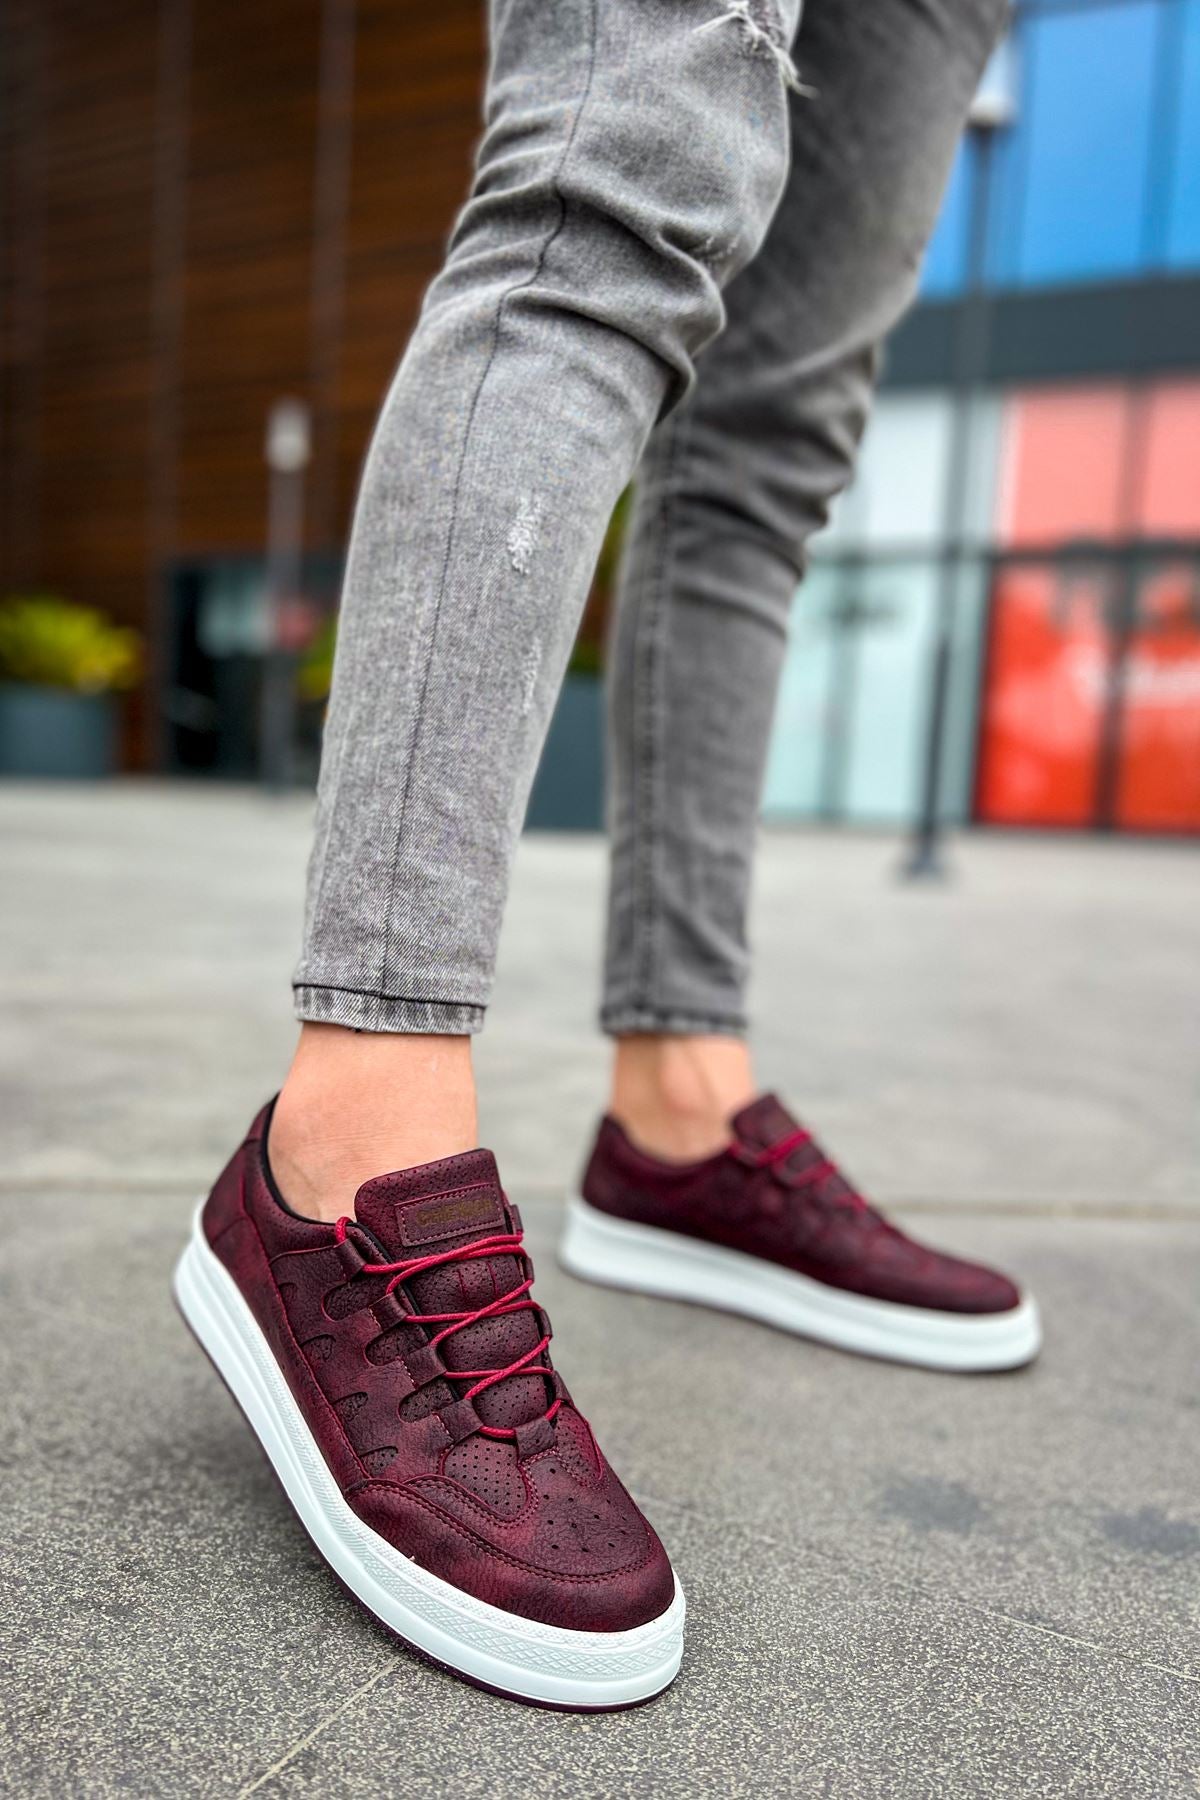 CH040 Men's Unisex Orthopedics Burgundy-White Sole Casual Sneaker Sports Shoes - STREETMODE ™